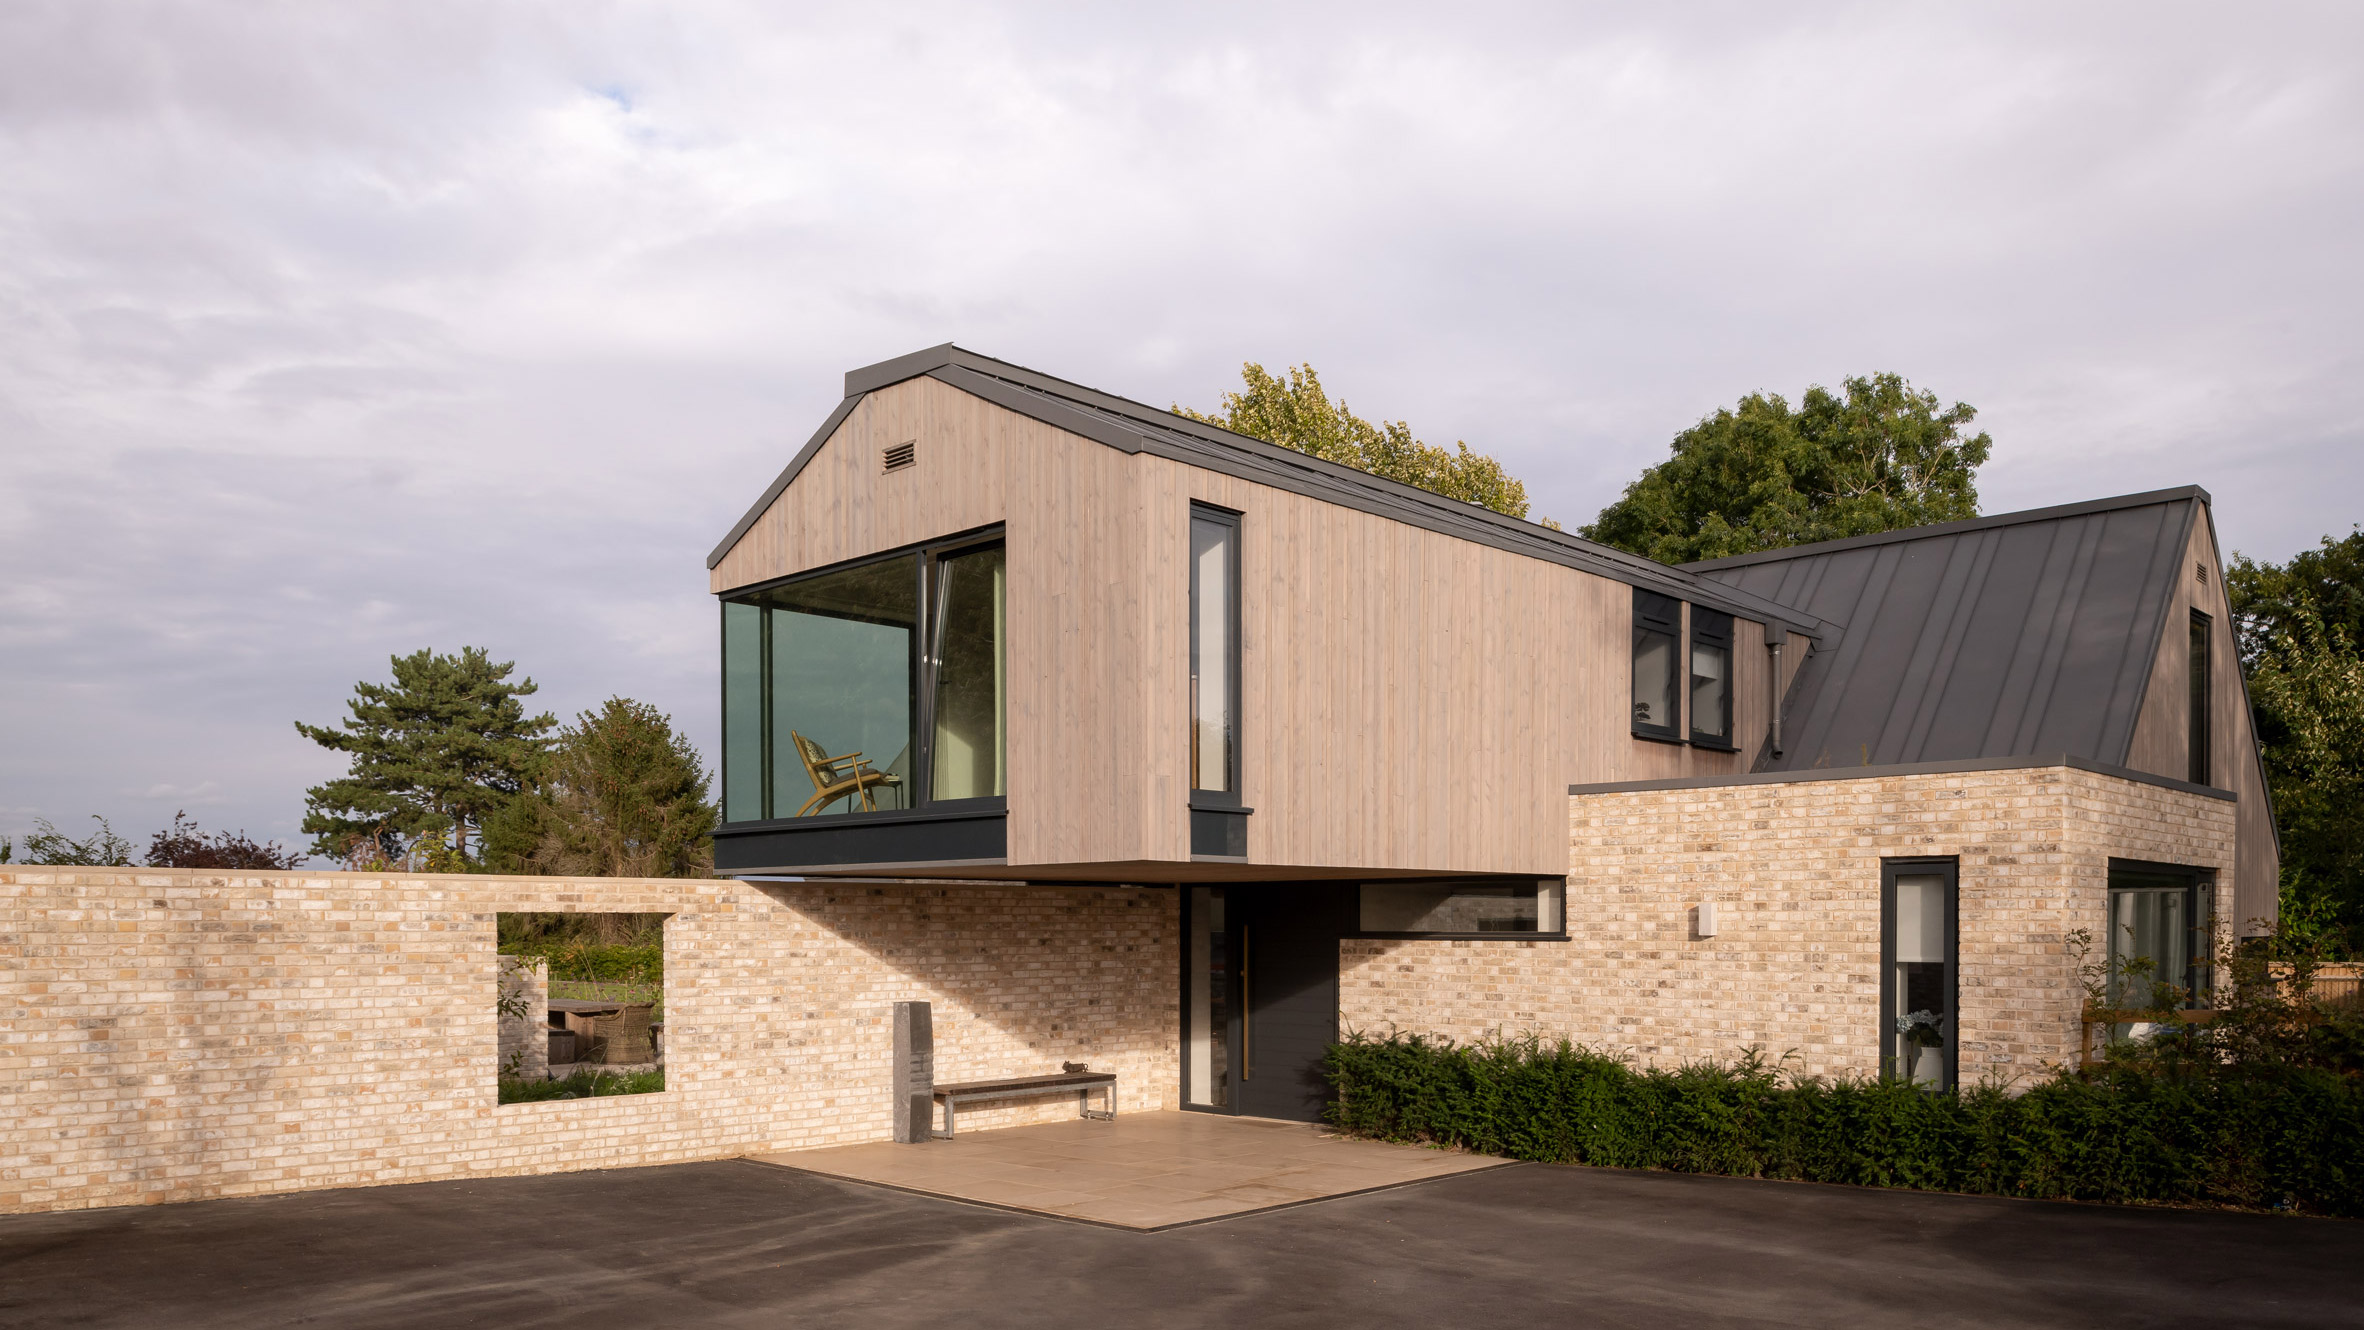 Weathered Timber Cladding Covers Shed Like Field House In Rural England